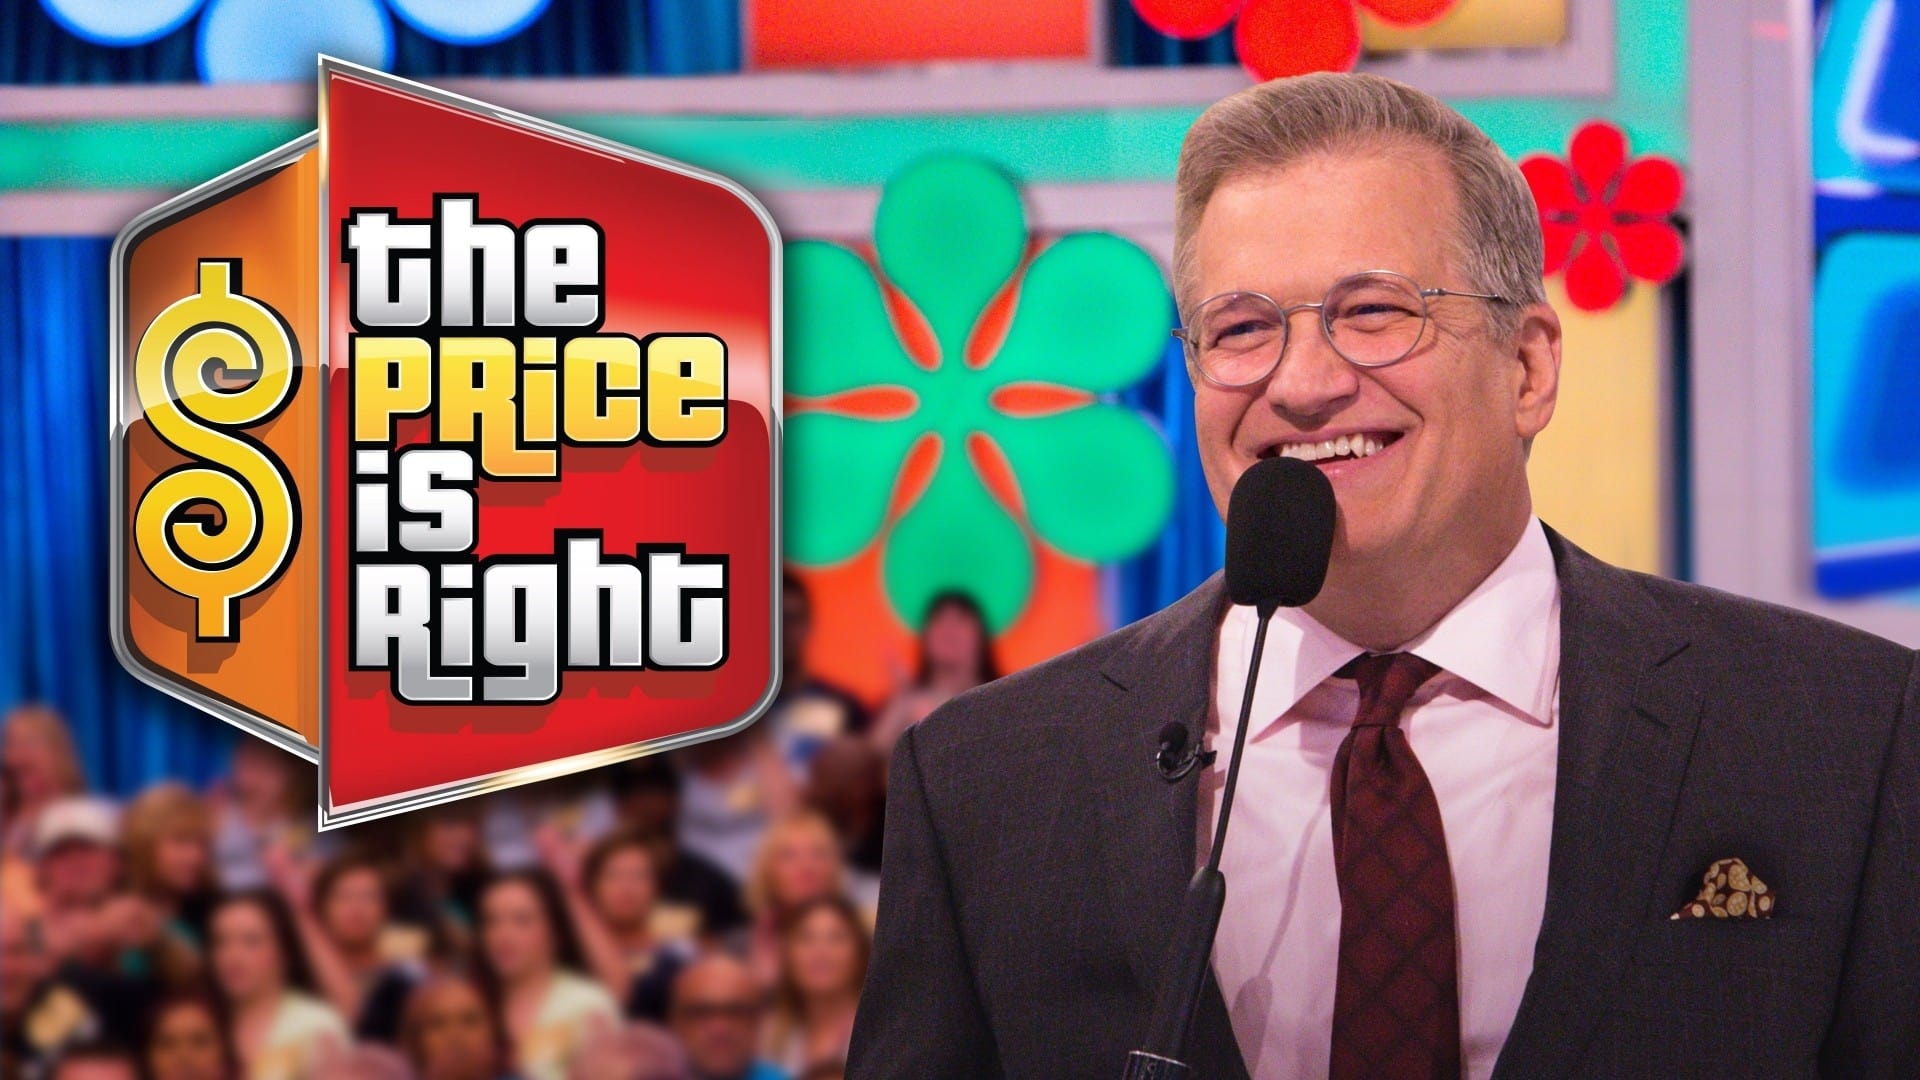 The Price Is Right - Season 2 Episode 205 : The Price Is Right Season 2 Episode 205